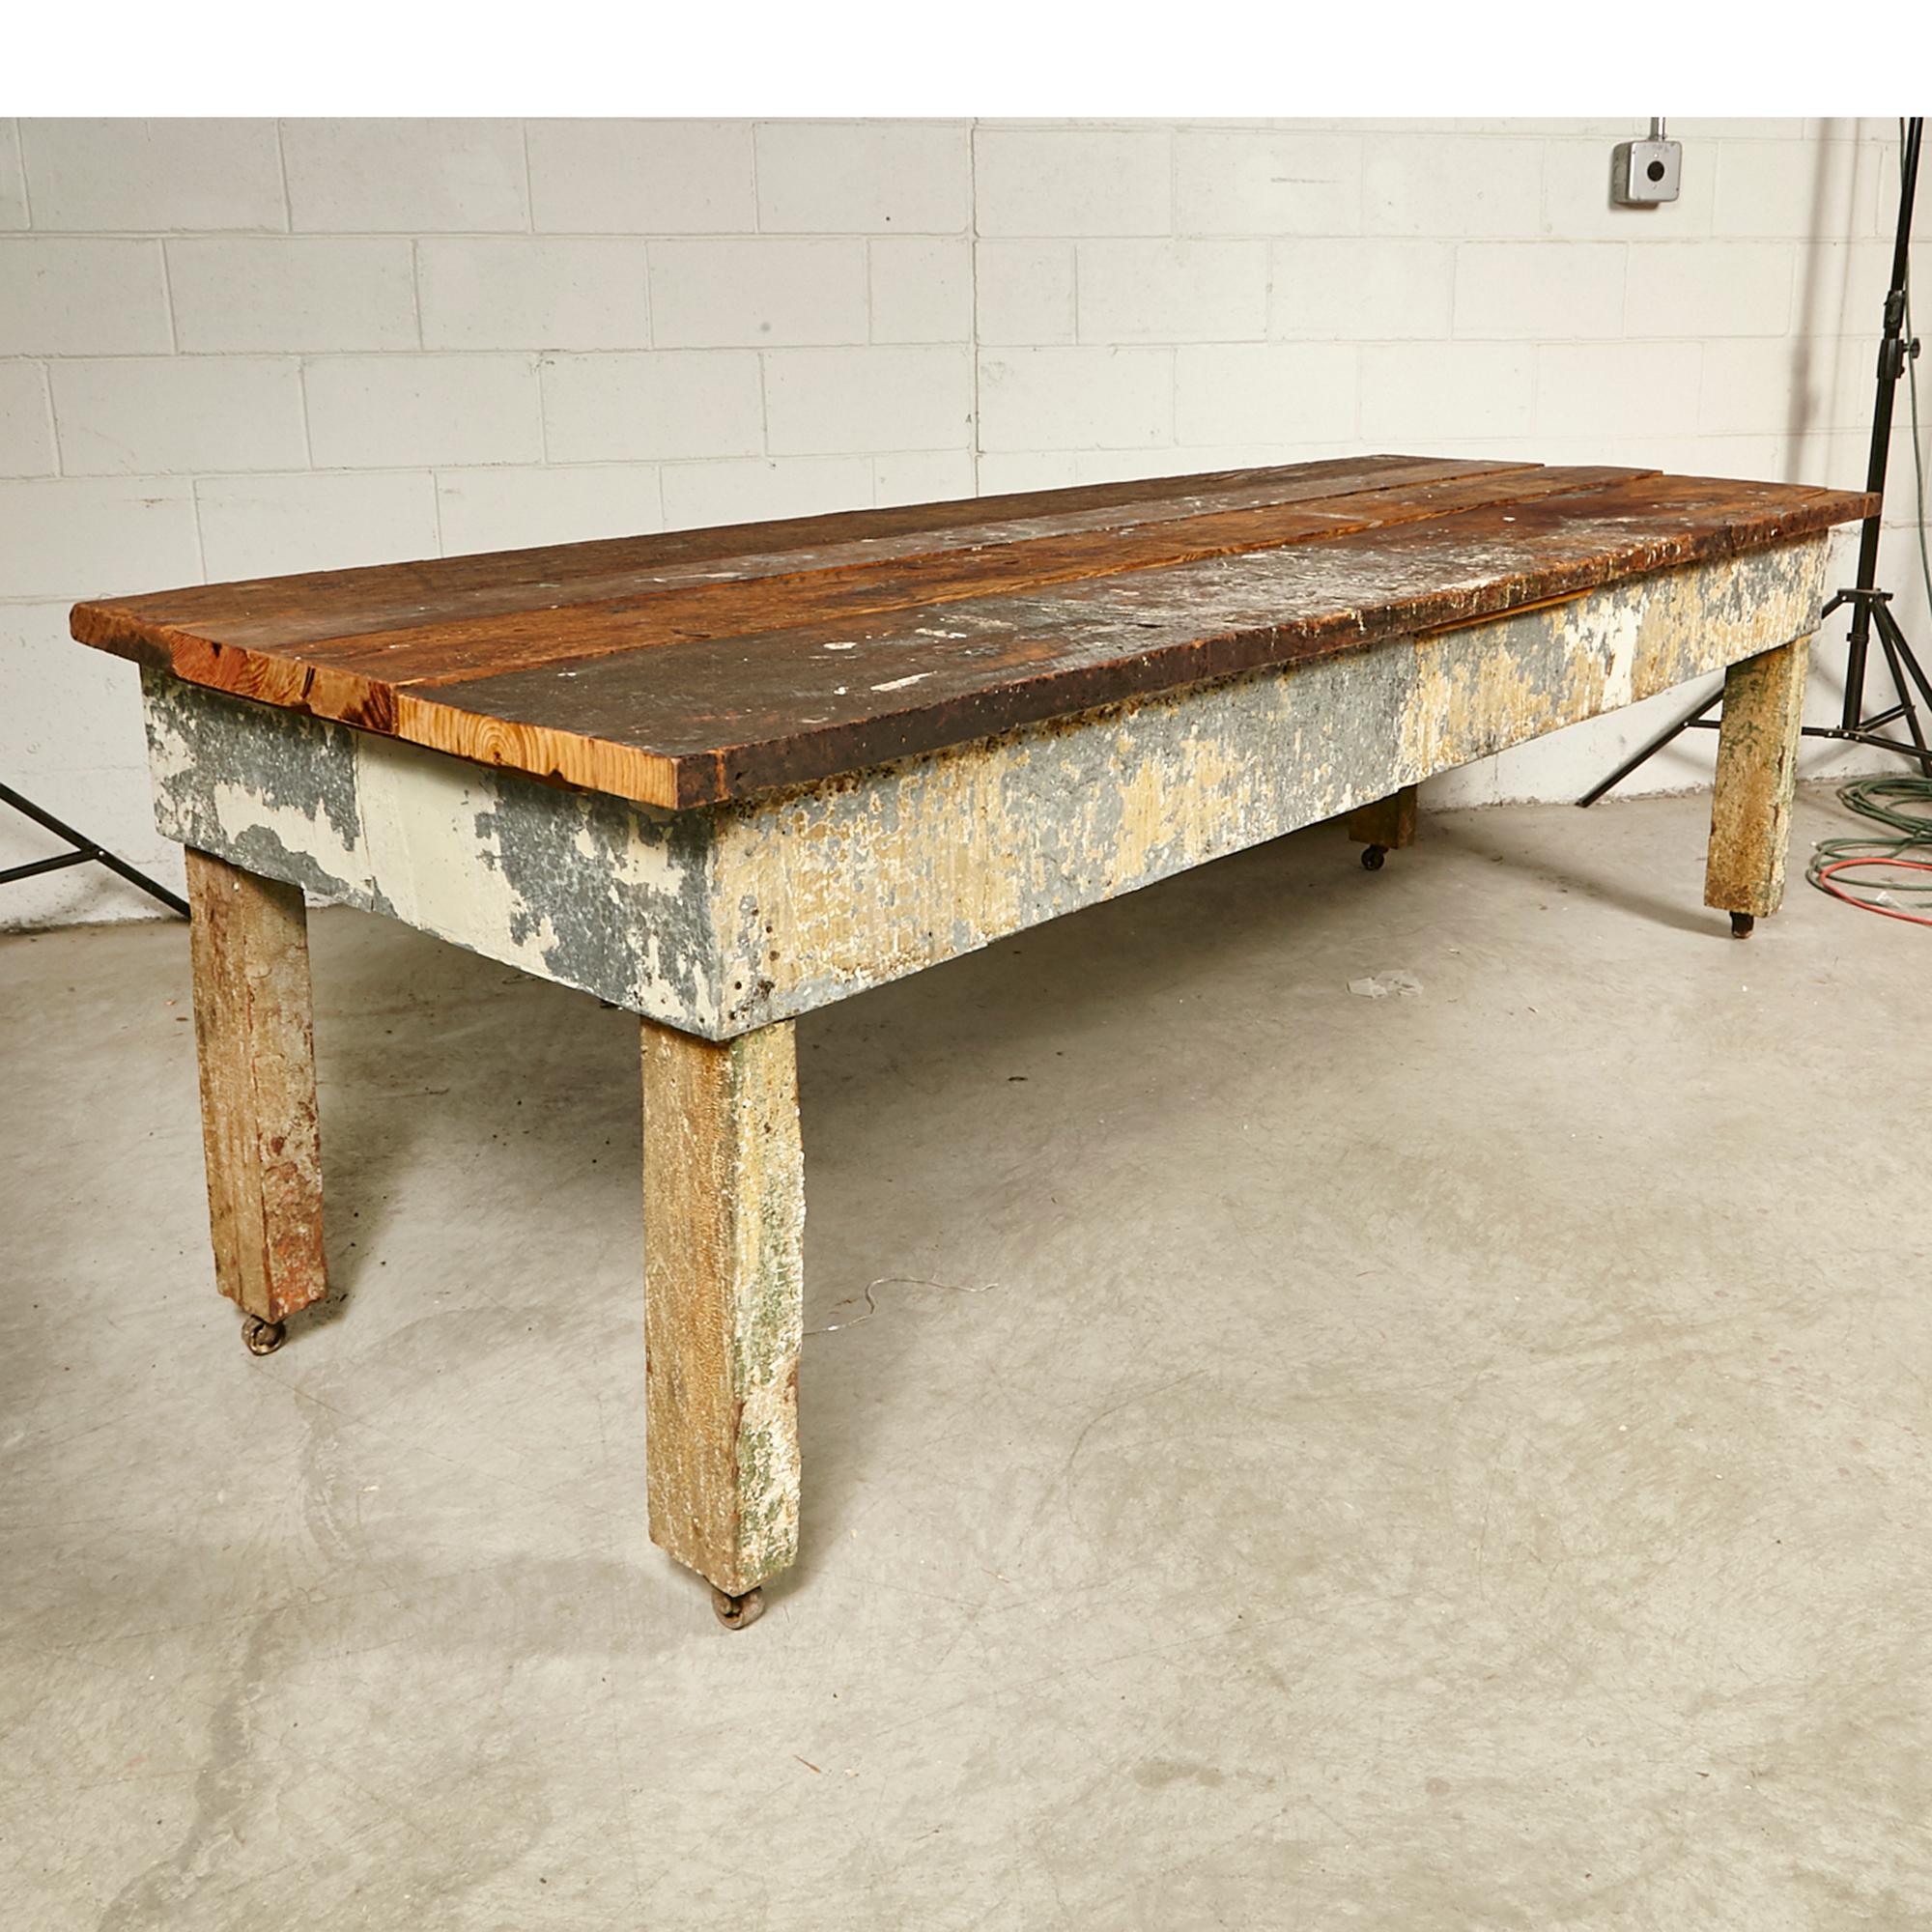 Vintage rustic multi-purpose wood plank top large country table. The table top is removeable with a wash basin and drain underneath. Original paint has been lacquered to retain the paint integrity. Wood blank top is 1.5in. thick. Original rustic